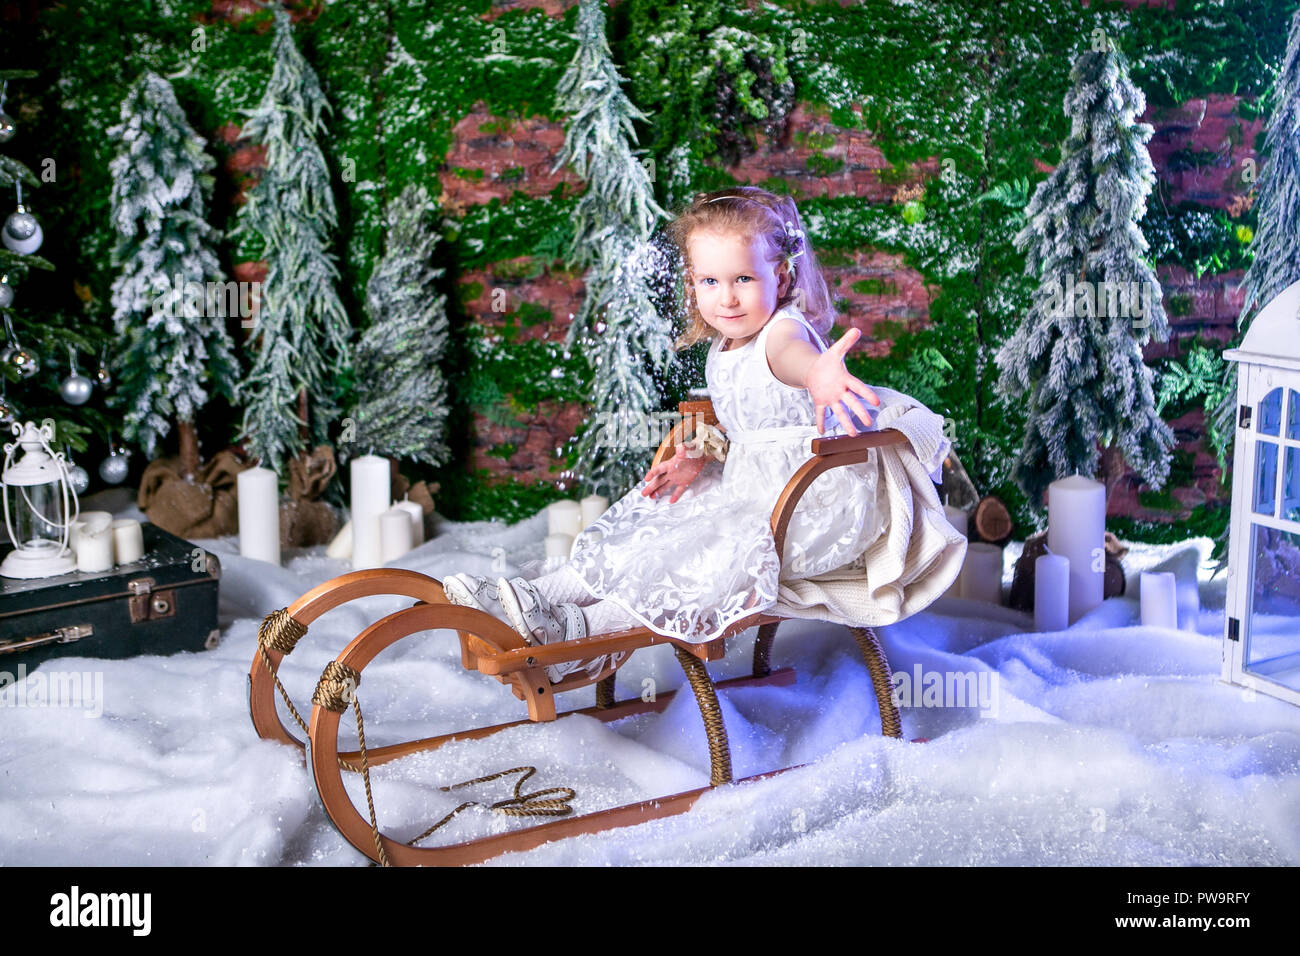 cute little princess in a white dress is sitting on a sled and throwing snow Stock Photo